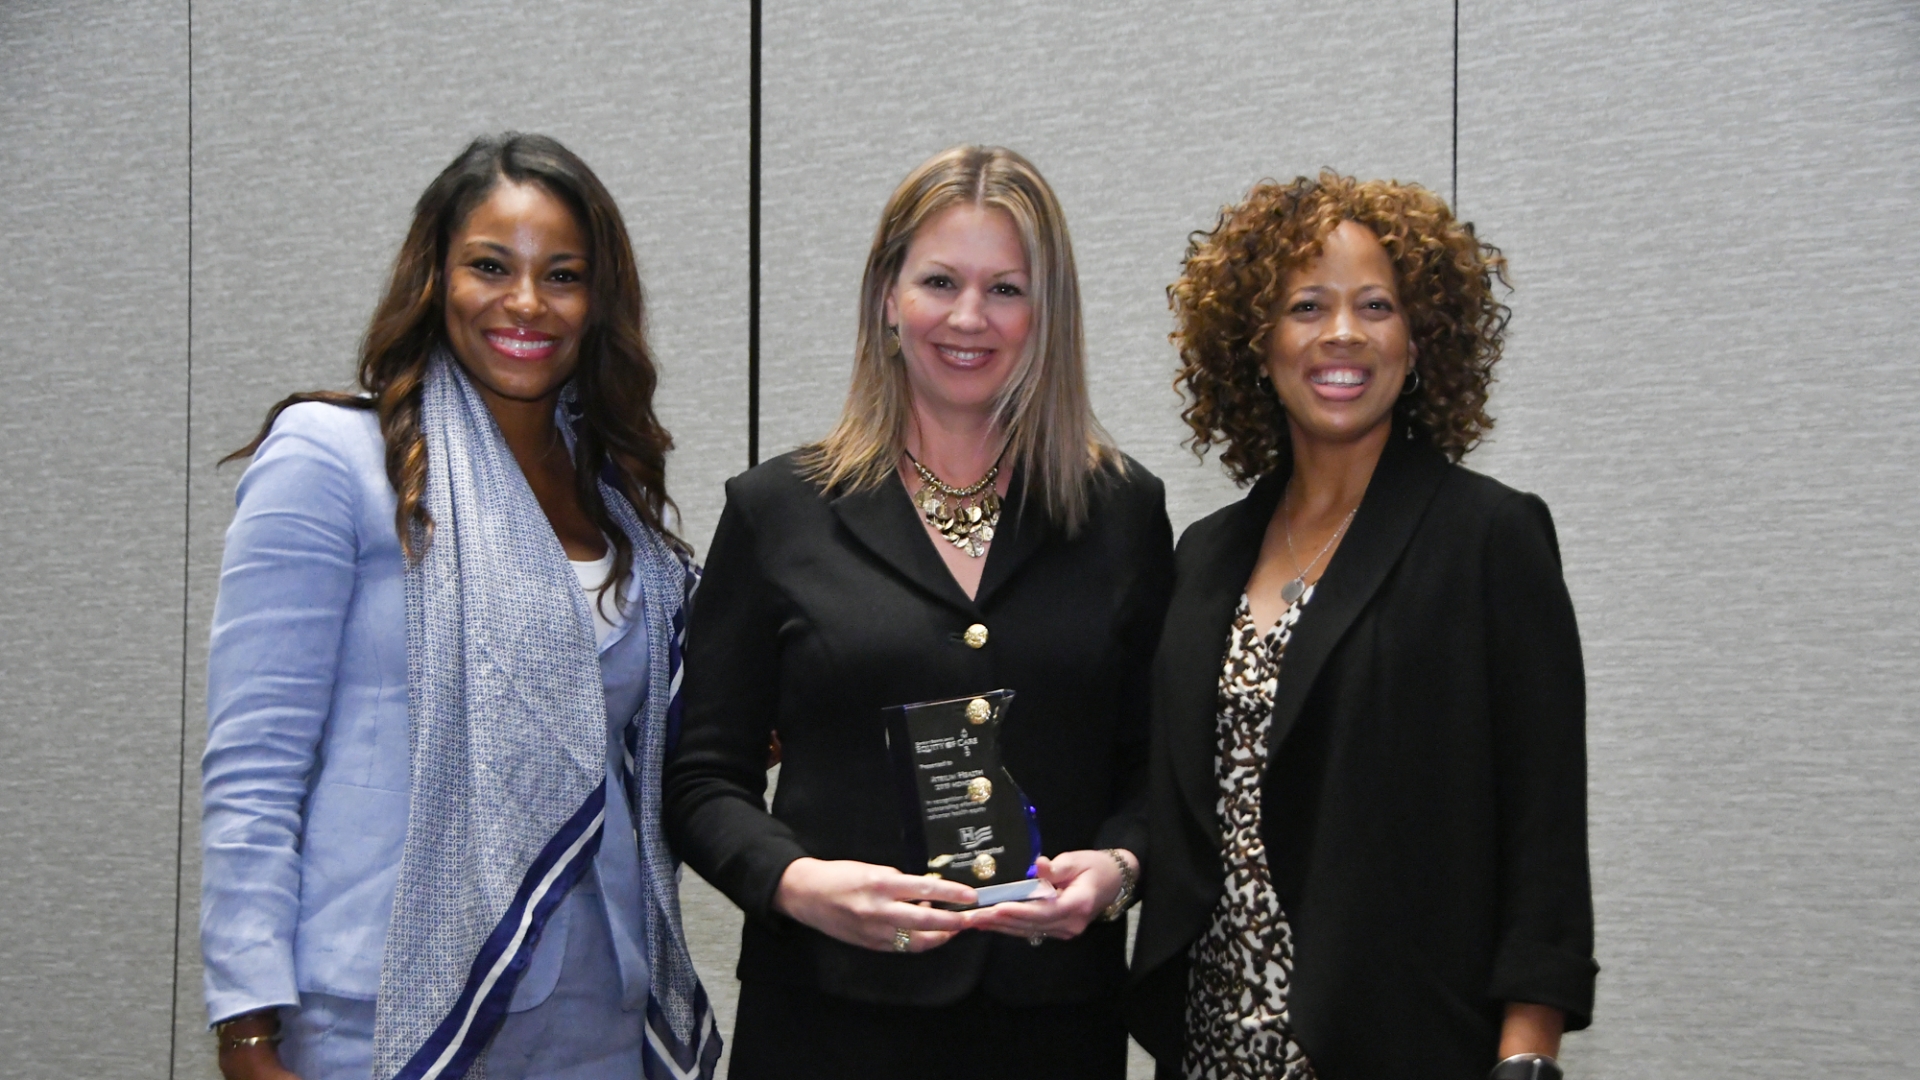 The American Hospital Association (AHA) recently named Atrium Health an honoree for the 2019 Carolyn Boone Lewis Equity of Care Award. The tribute recognizes hospitals and health systems for their efforts to reduce healthcare inequities and advance diversity and inclusion. 